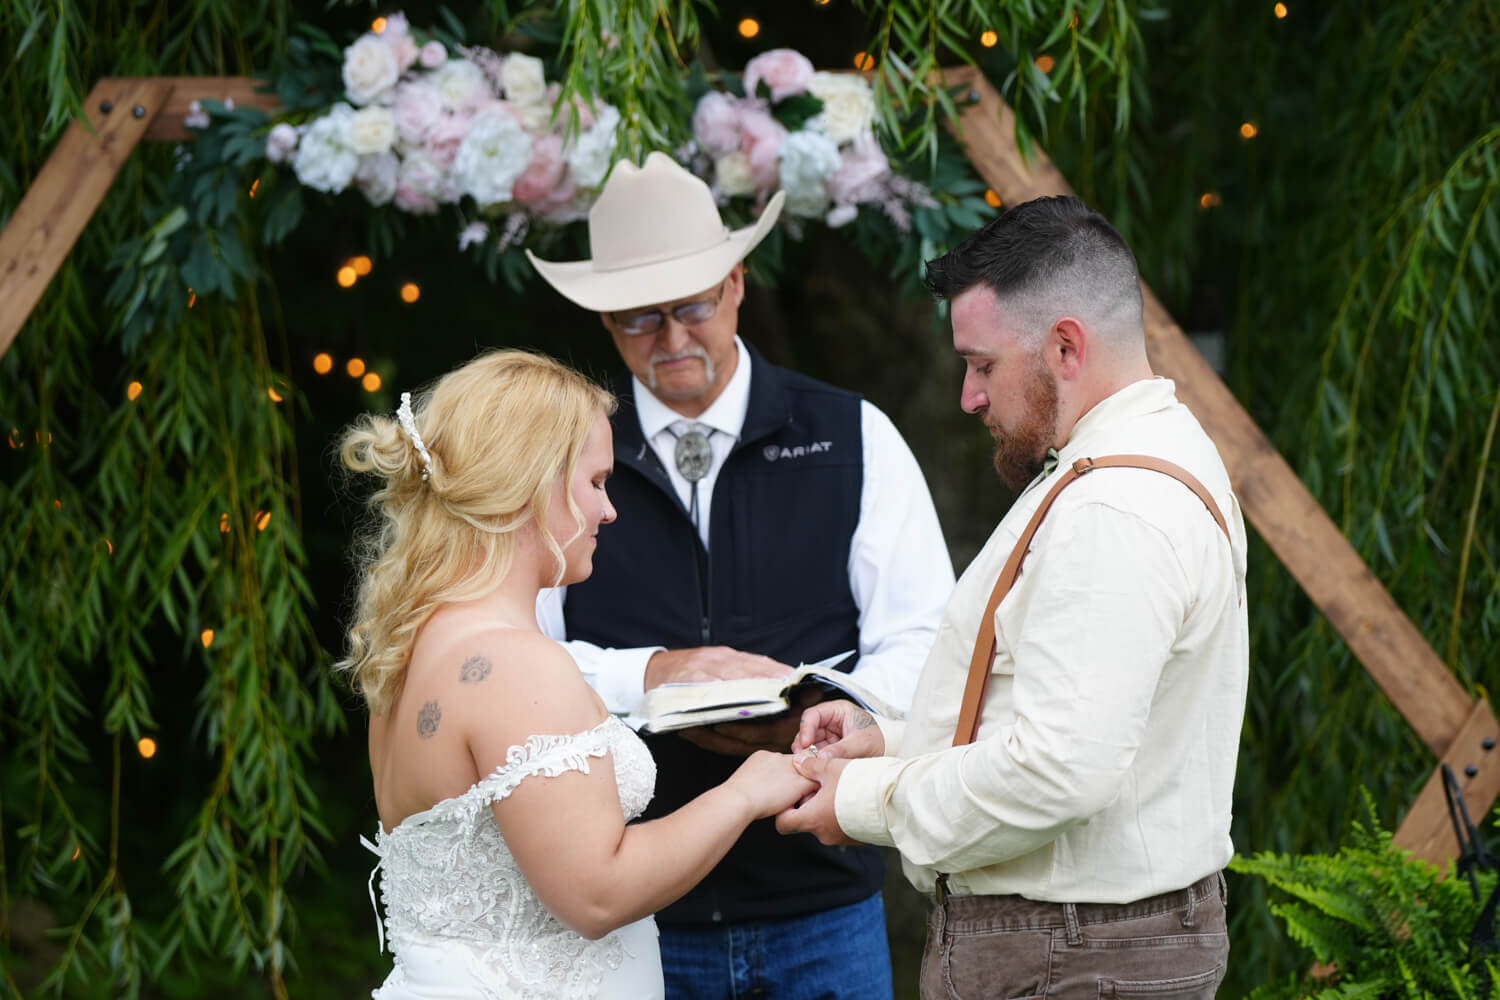 Pastor Lloyd officiating a wedding with his cowboy hat on at a hexagon arbor by a willow tree with lights as the couple exchanges wedding rings